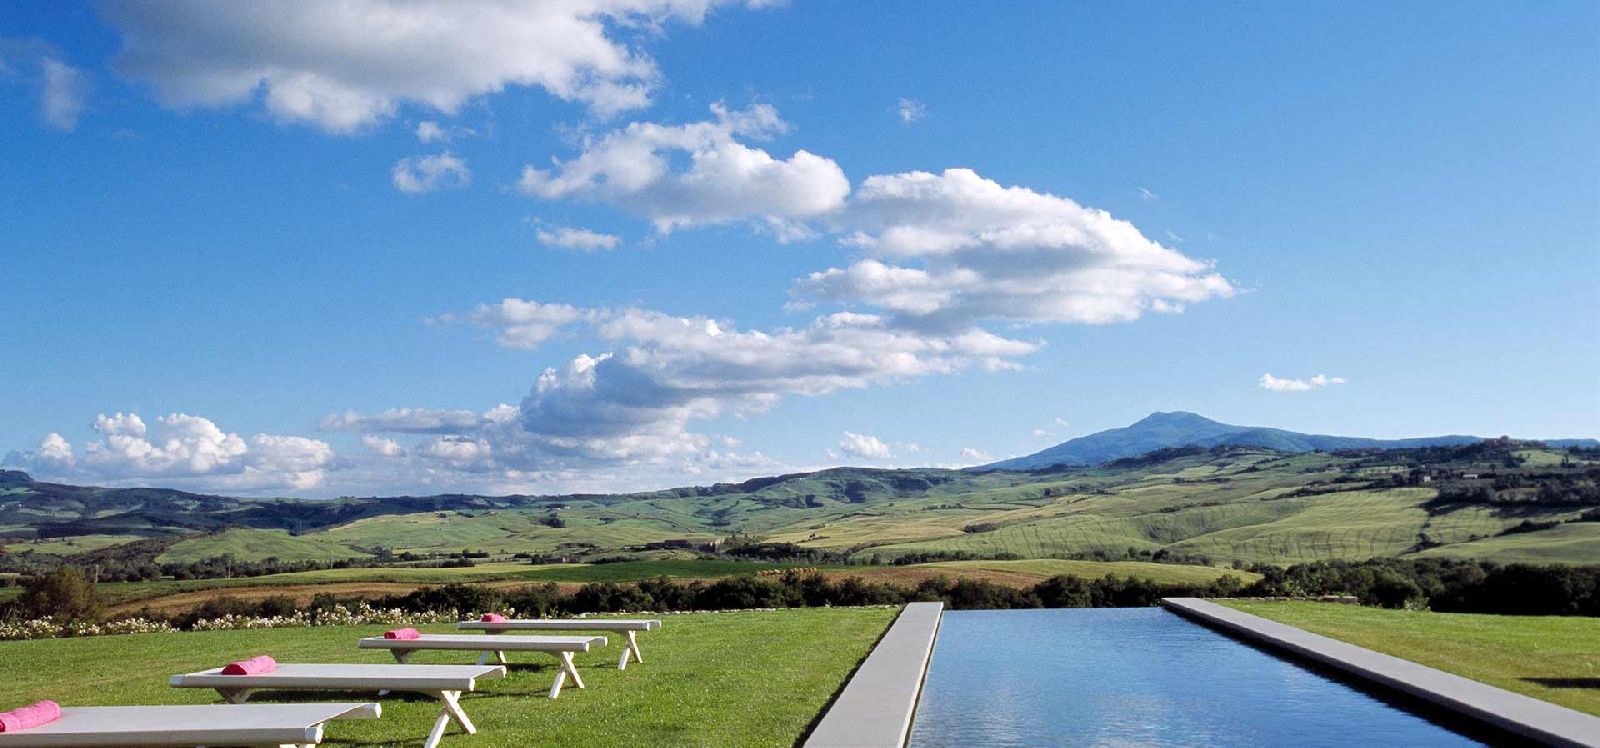 The swimming pool at Villa d'Orcia in Tuscany